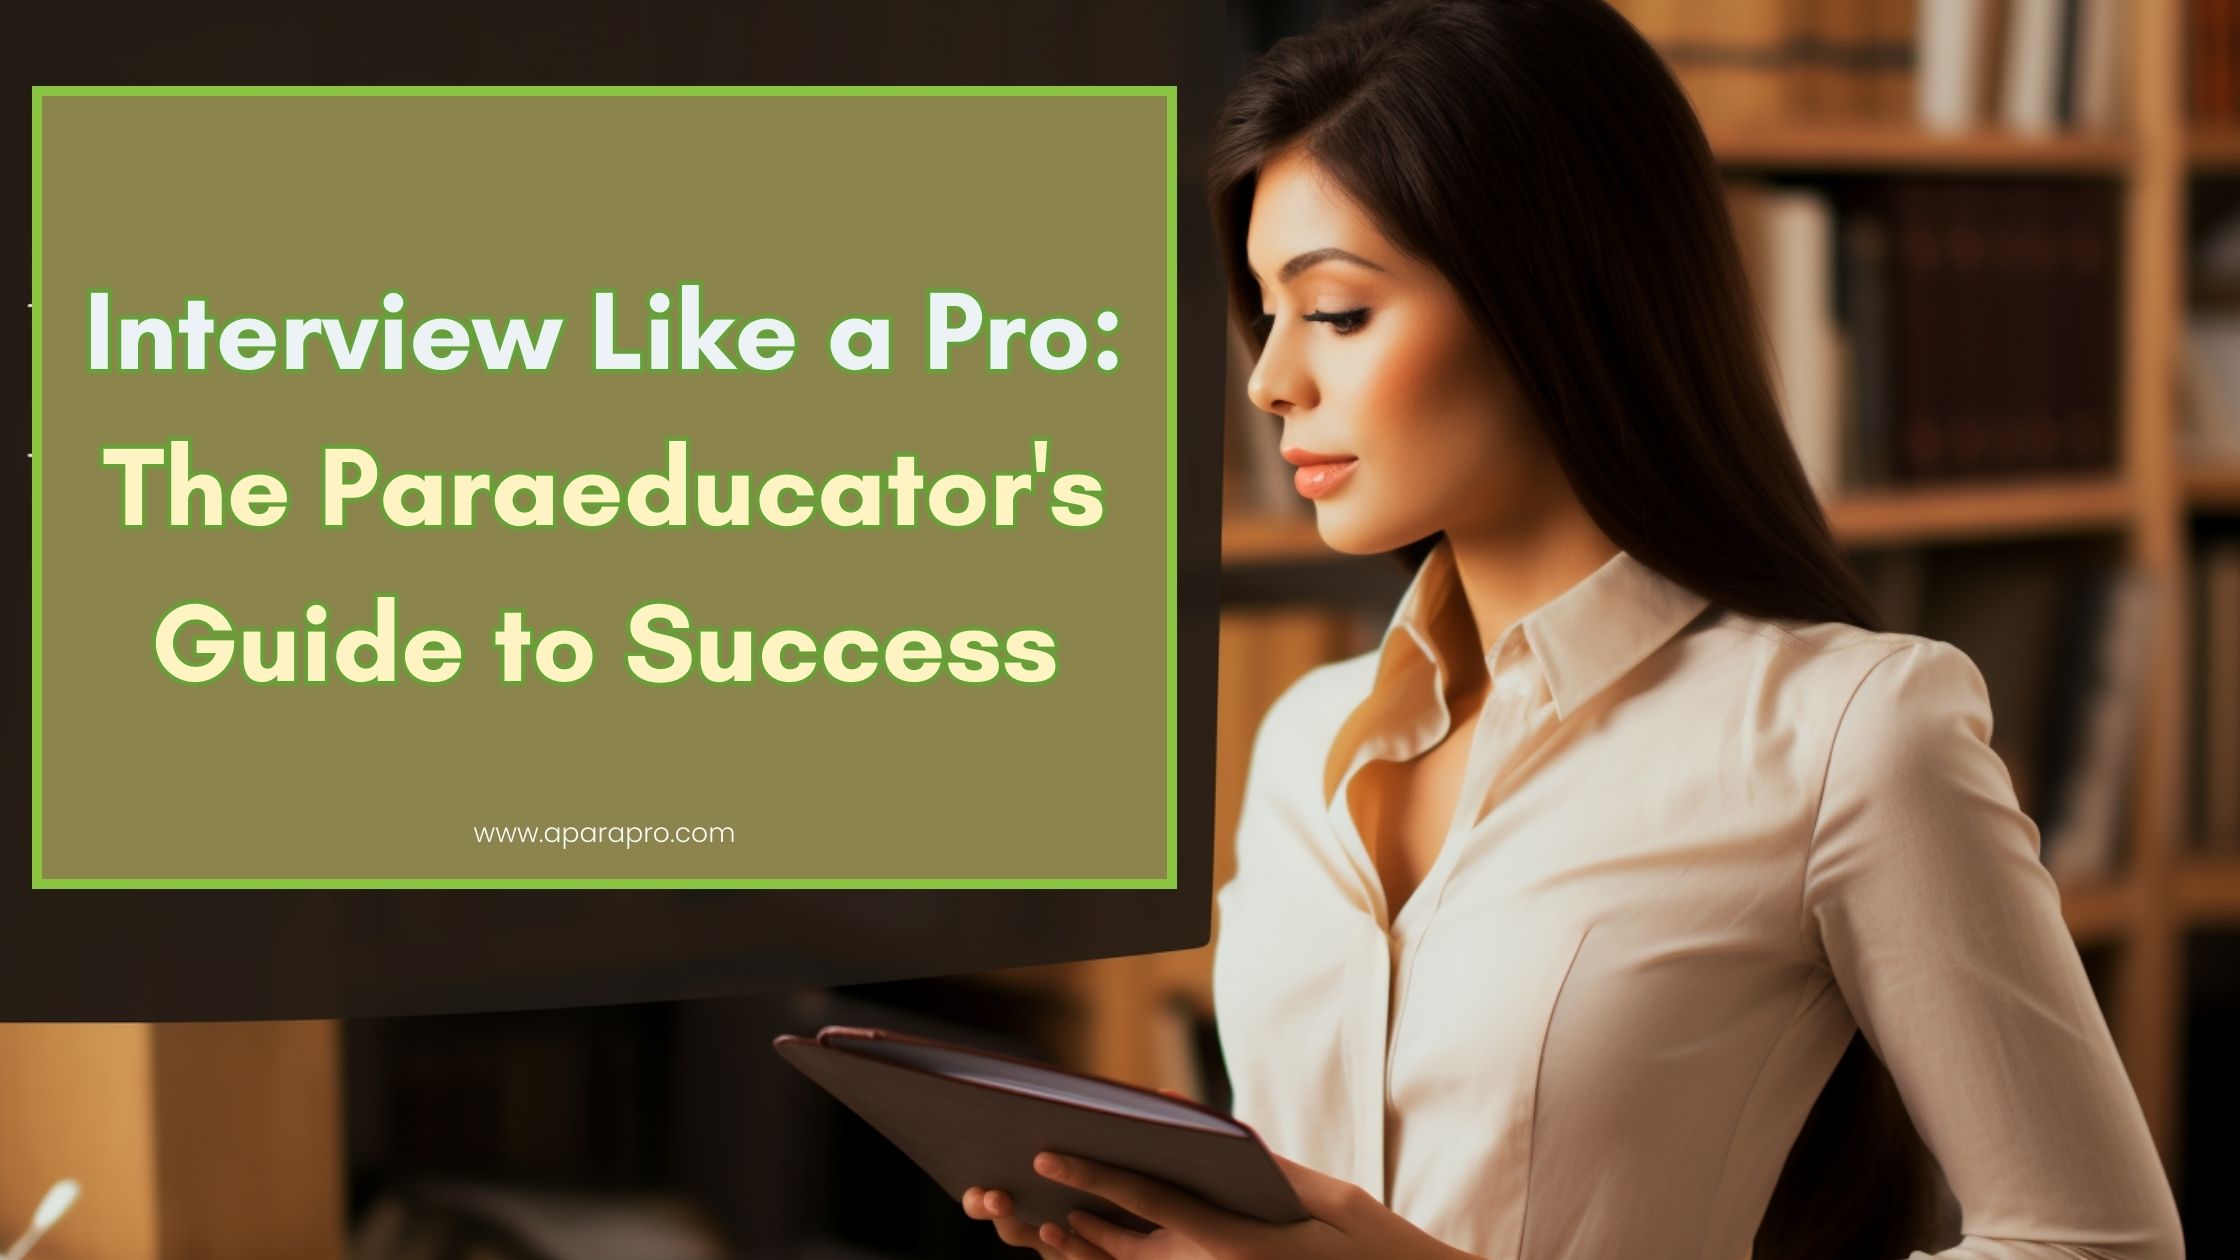 interview like a pro: a paraeducator's guide to success - featured image by a para pro